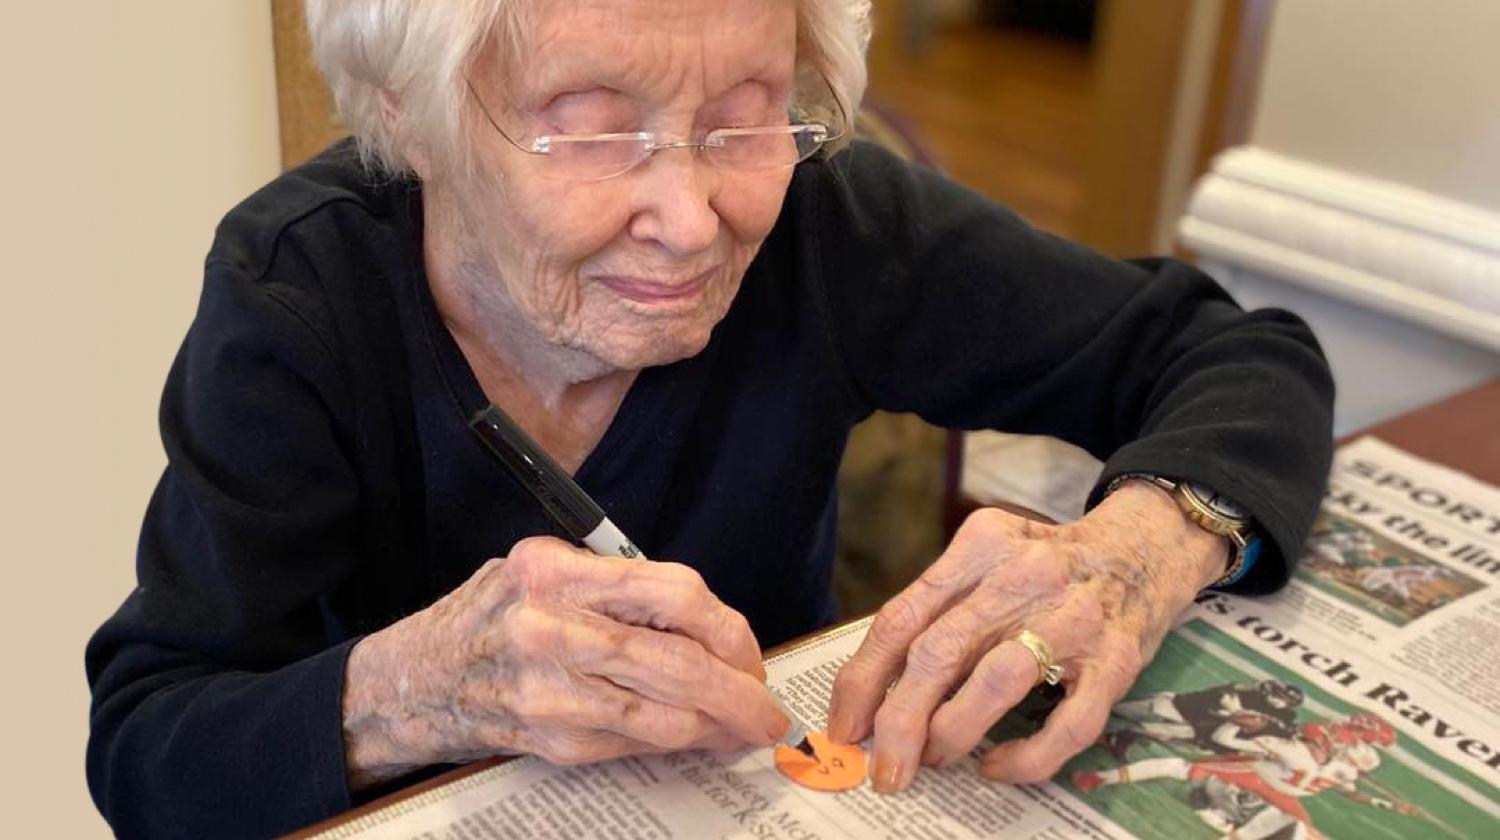 Elderly woman and art project